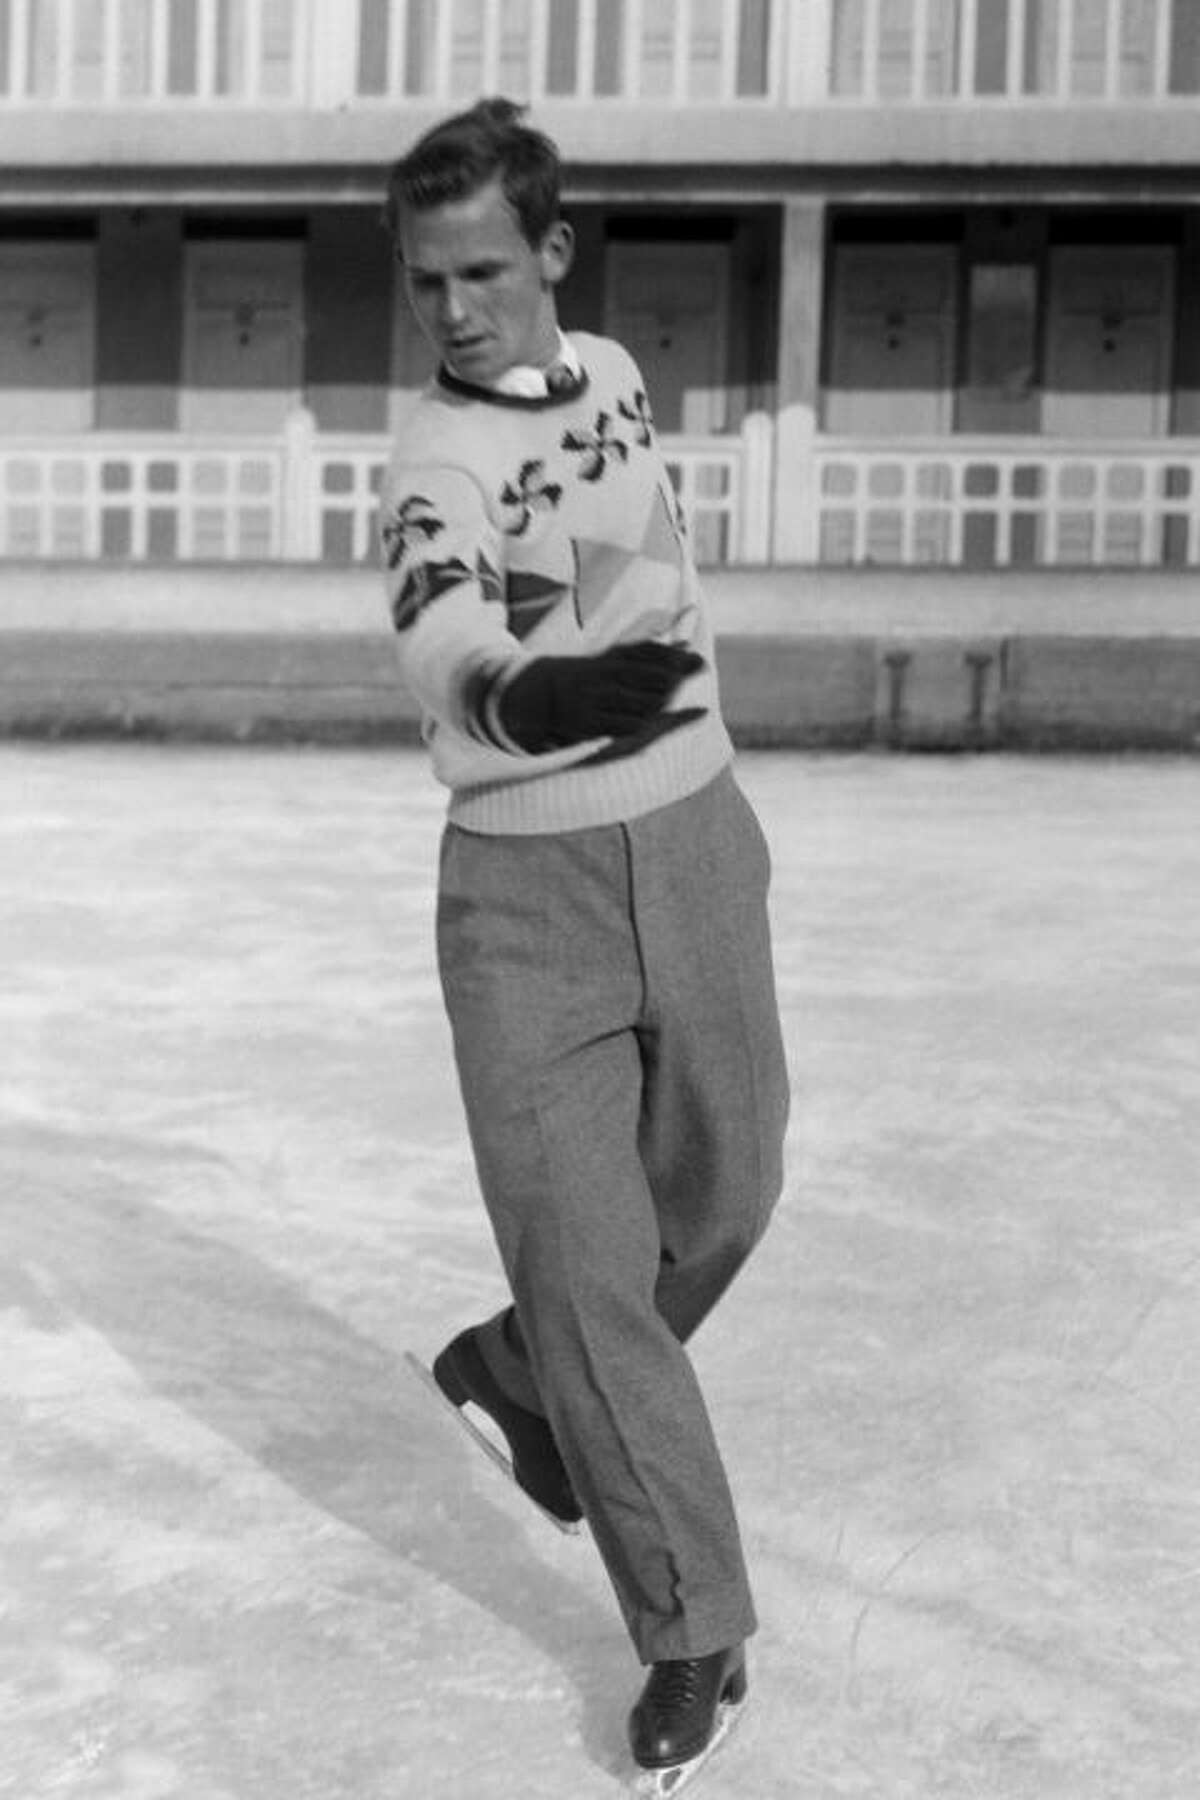 1) 1948: Dick Button American figure skaters didn't have the option of of wearing spandex 50 years ago. The fabric wouldn't be invented for a whole decade. Luckily Dick Button secured the gold medal in Saint Moritz, Switzerland, wearing pleated trousers and a thick sweater, and repeated the feat four years later in Oslo, Norway.